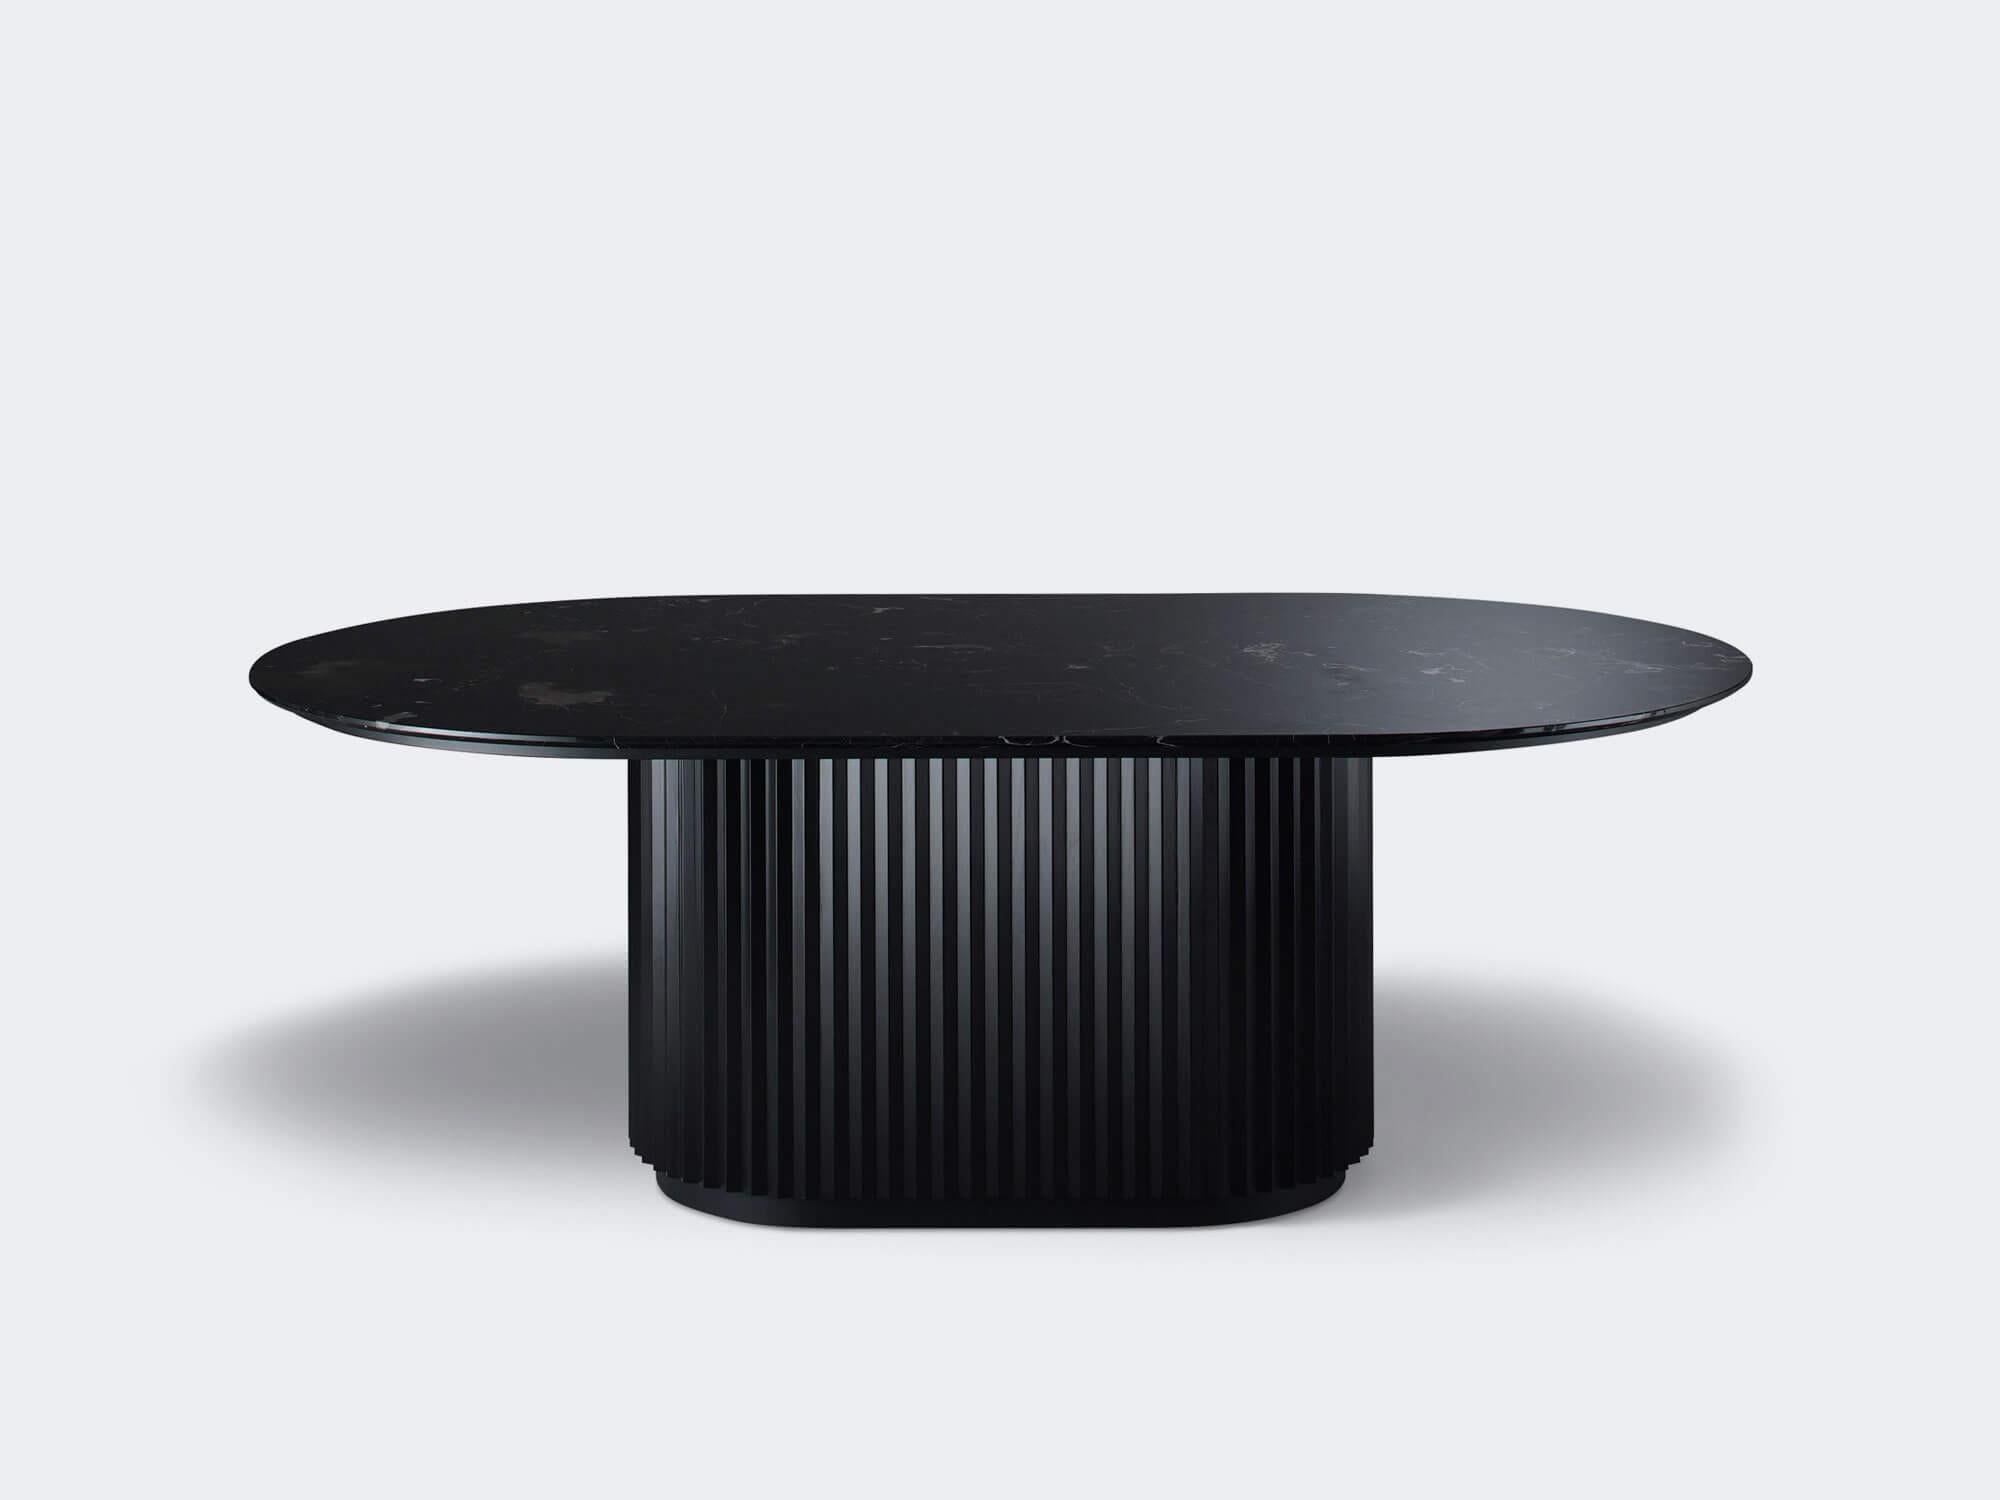 Eternel XL Dining Table by Milla & Milli
Signed by Maša Vukmanović, Jelena Lukač Kirš, Jakov Šrajer
Dimensions: W 280-300 x D 130 x H 75 cm 
Materials: Ash Noir Lacquered, Black Metal, Marble Nero Marquina. 


Eternal Dining Table:
The centrepiece